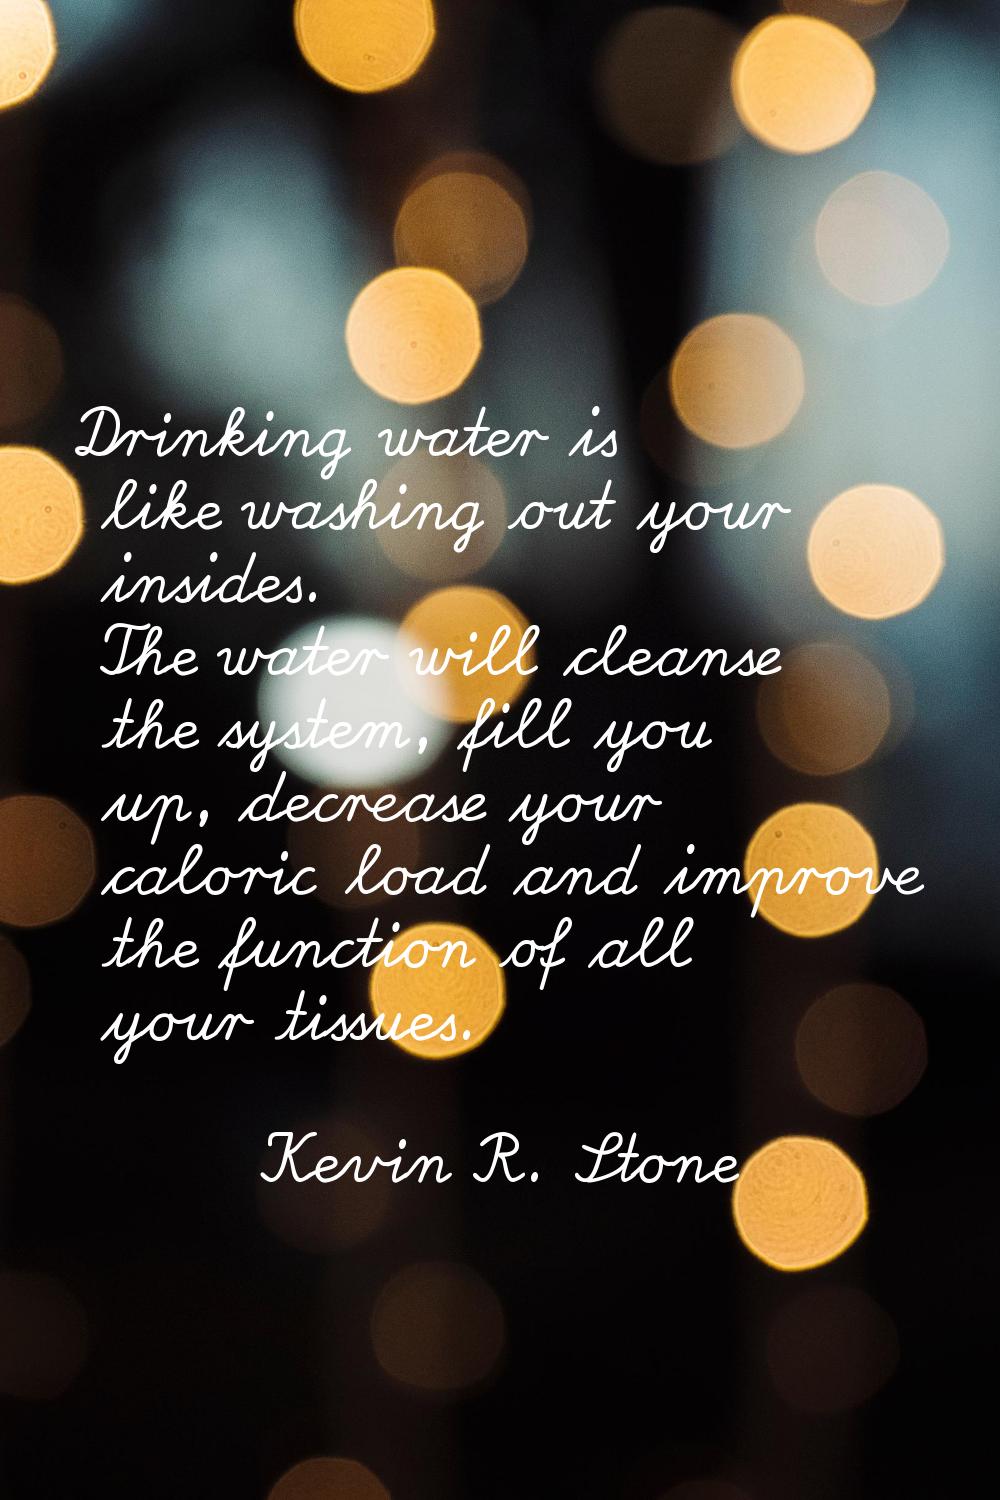 Drinking water is like washing out your insides. The water will cleanse the system, fill you up, de